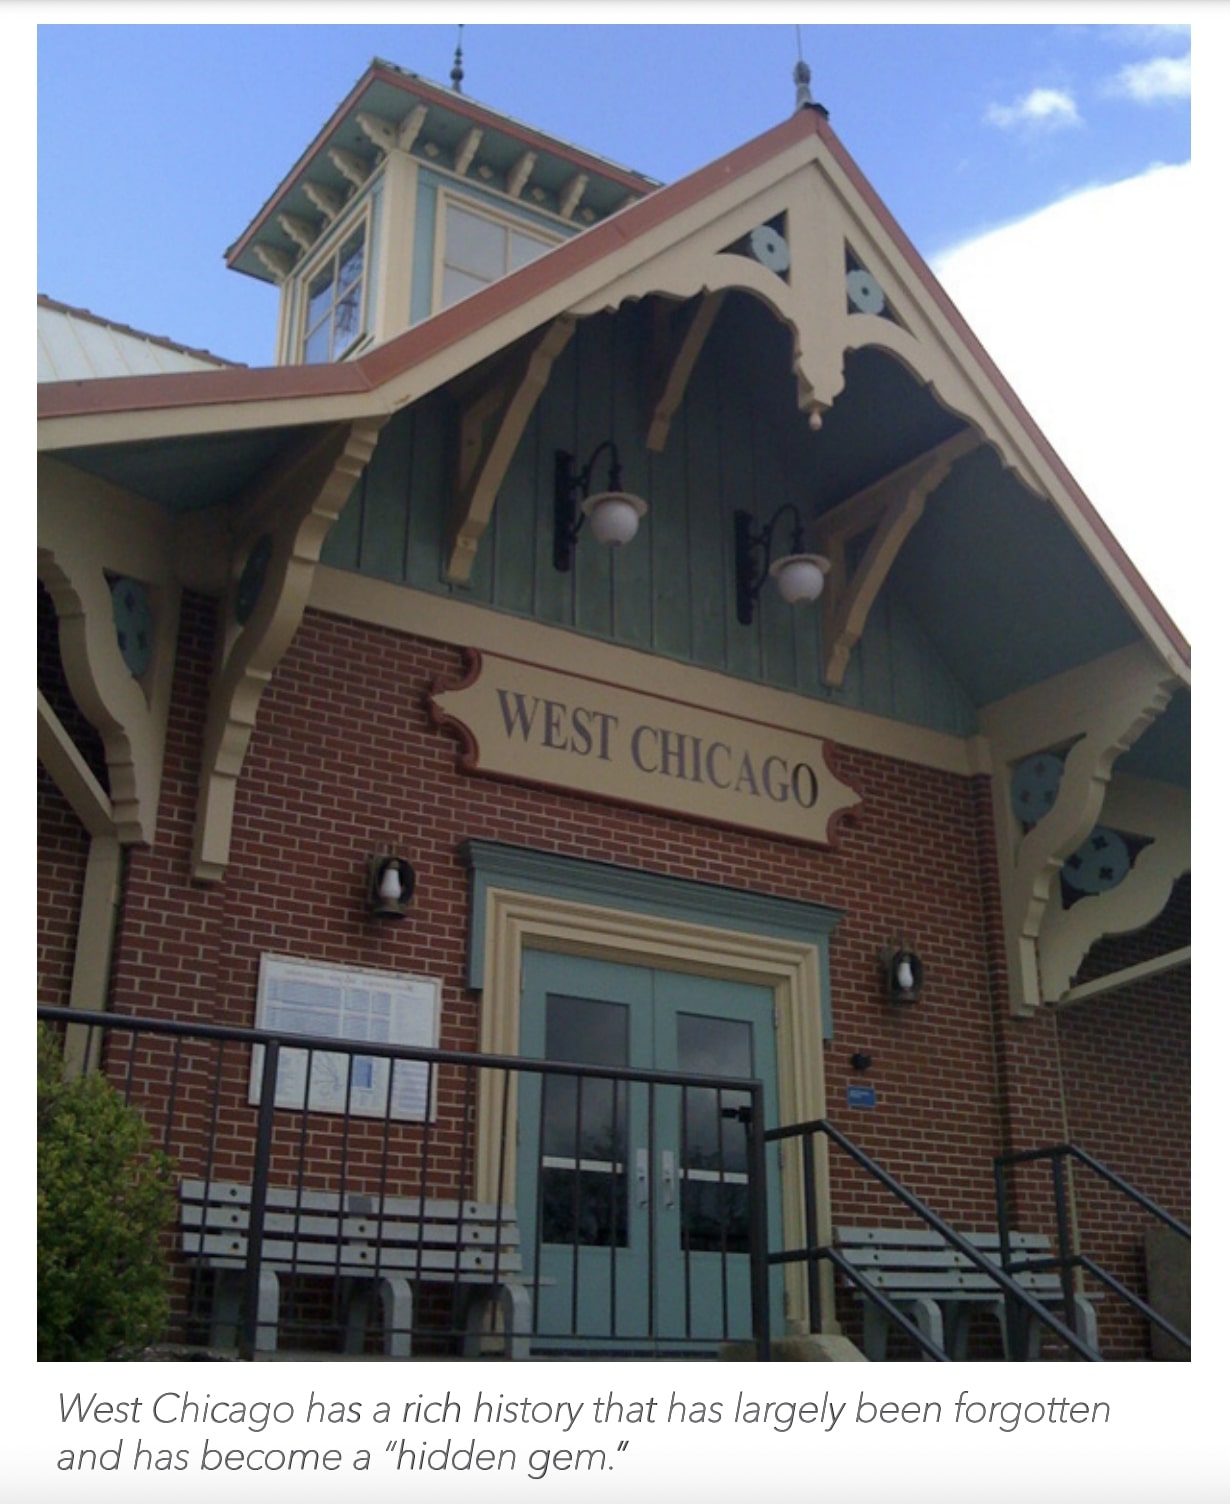 An image from the City of West Chicago's marketing plan